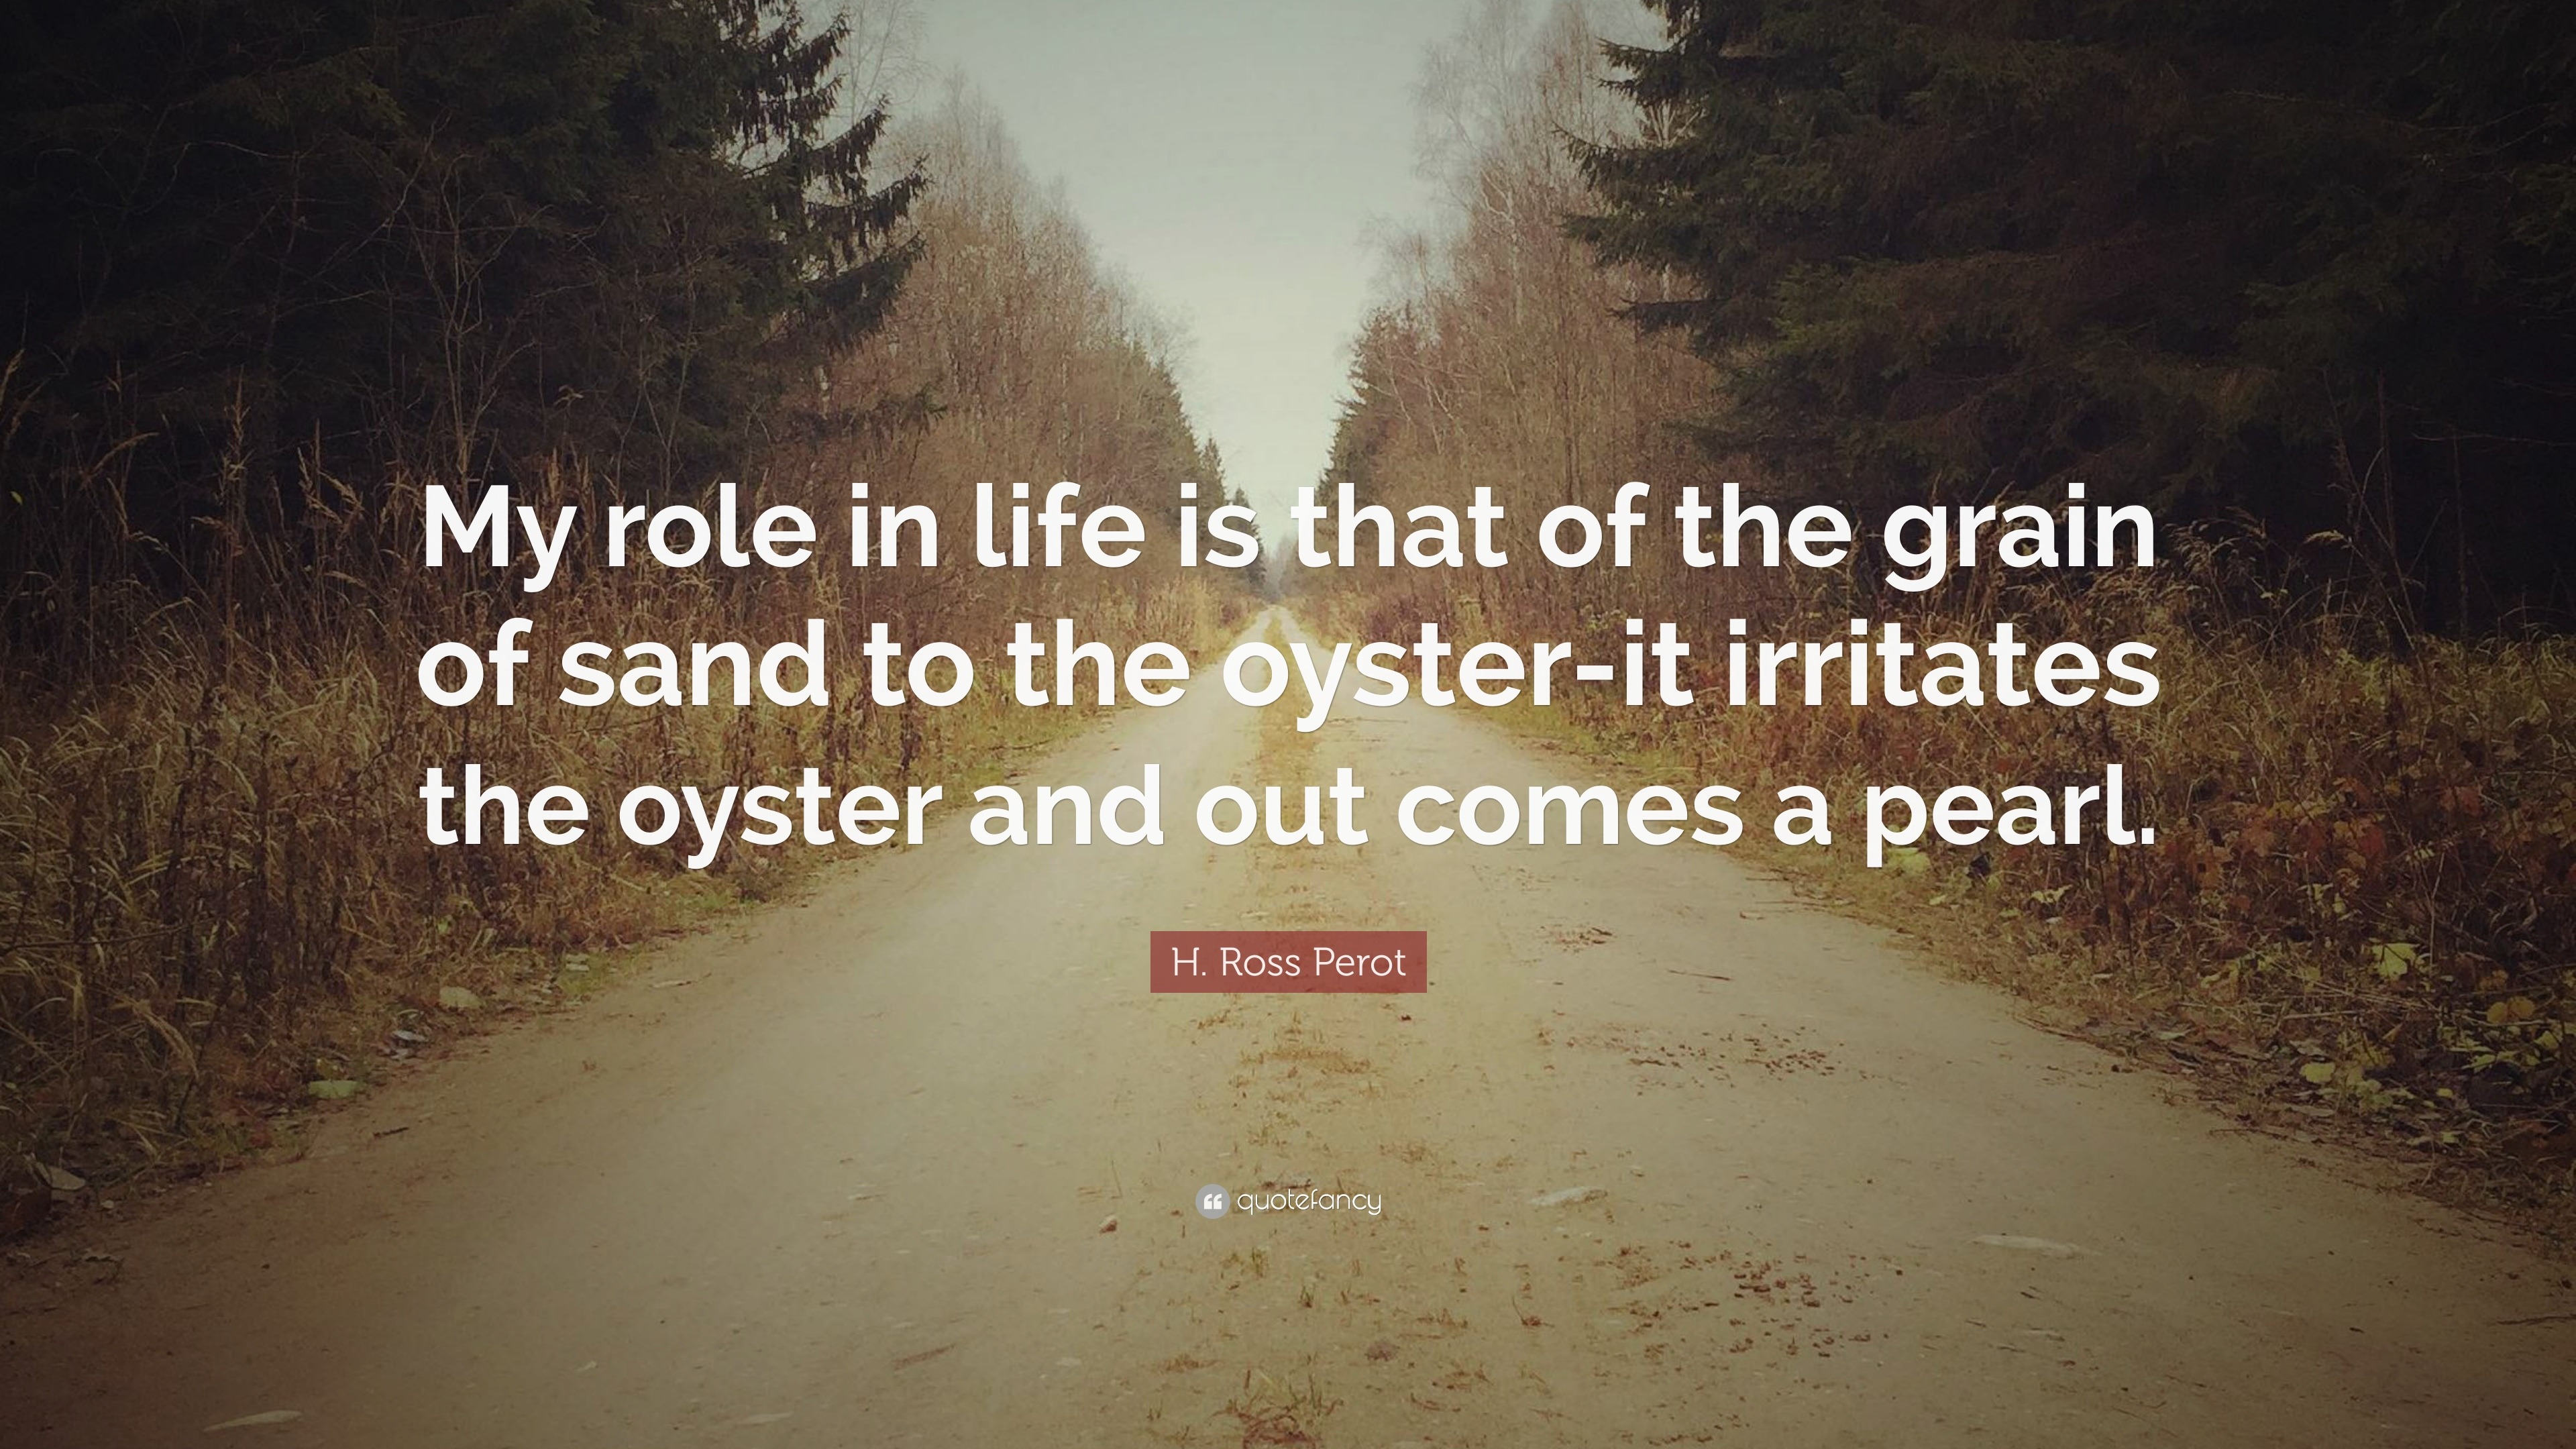 H. Ross Perot Quote: "My role in life is that of the grain of sand to the oyster-it irritates ...